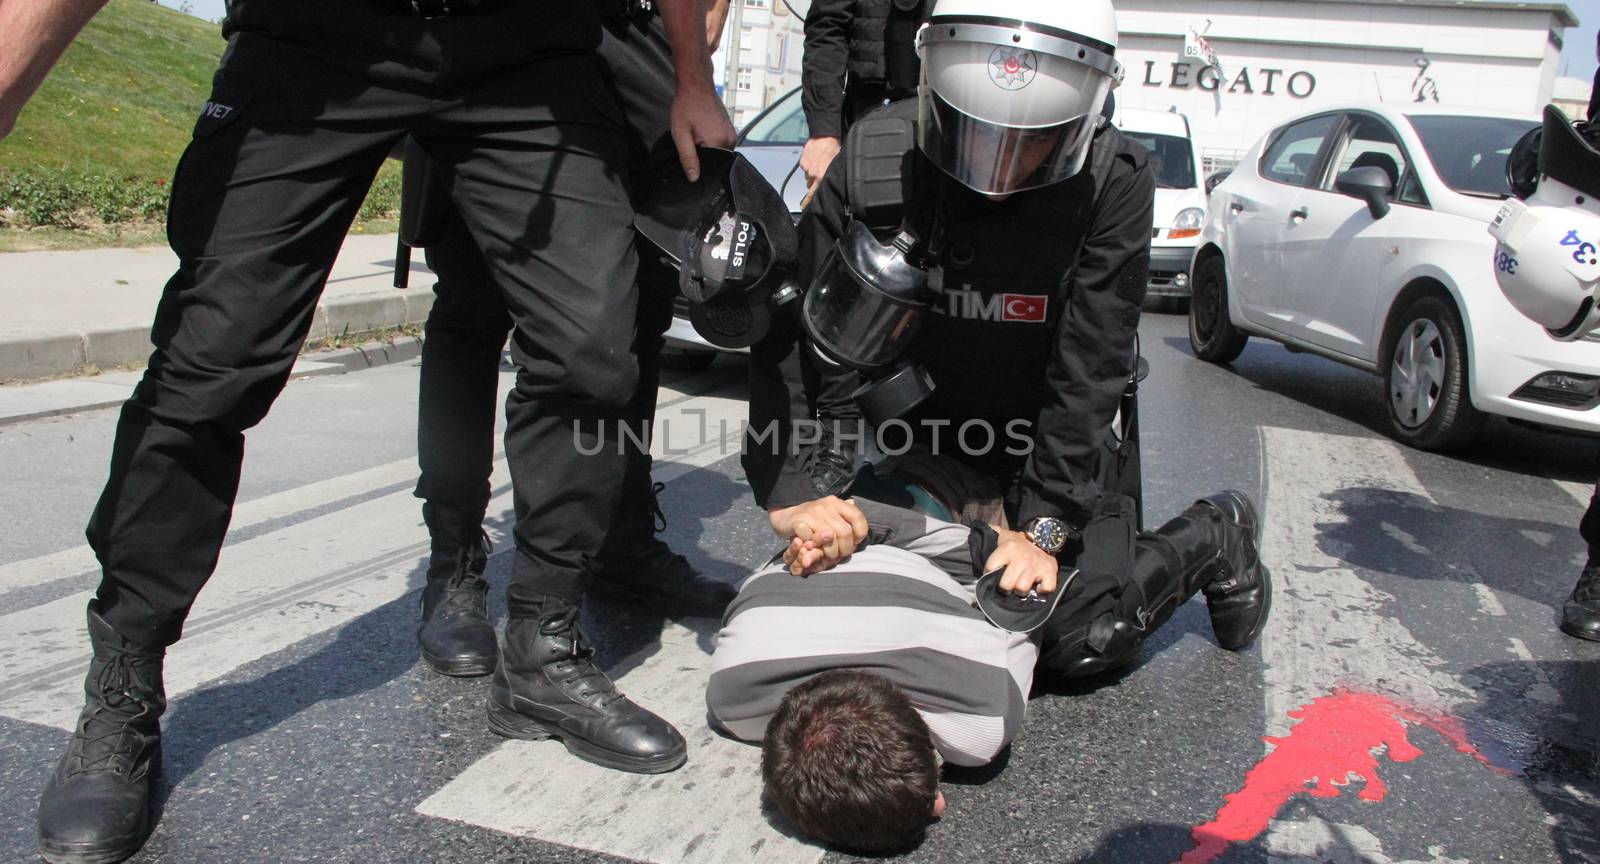 TURKEY, Istanbul: A policeman arrests a protester outside the courthouse in Istanbul, Turkey, on April 20, 2016, during the second hearing in the trial of a police officer accused of killing Dilek Doğan. Dogan died after being shot dead during a police raid of her family's house in Istanbul's Sariyer district, last October. Dozens of protesters, who shouted Murderers of Dilek must be tried, has been taken into custody by police. 